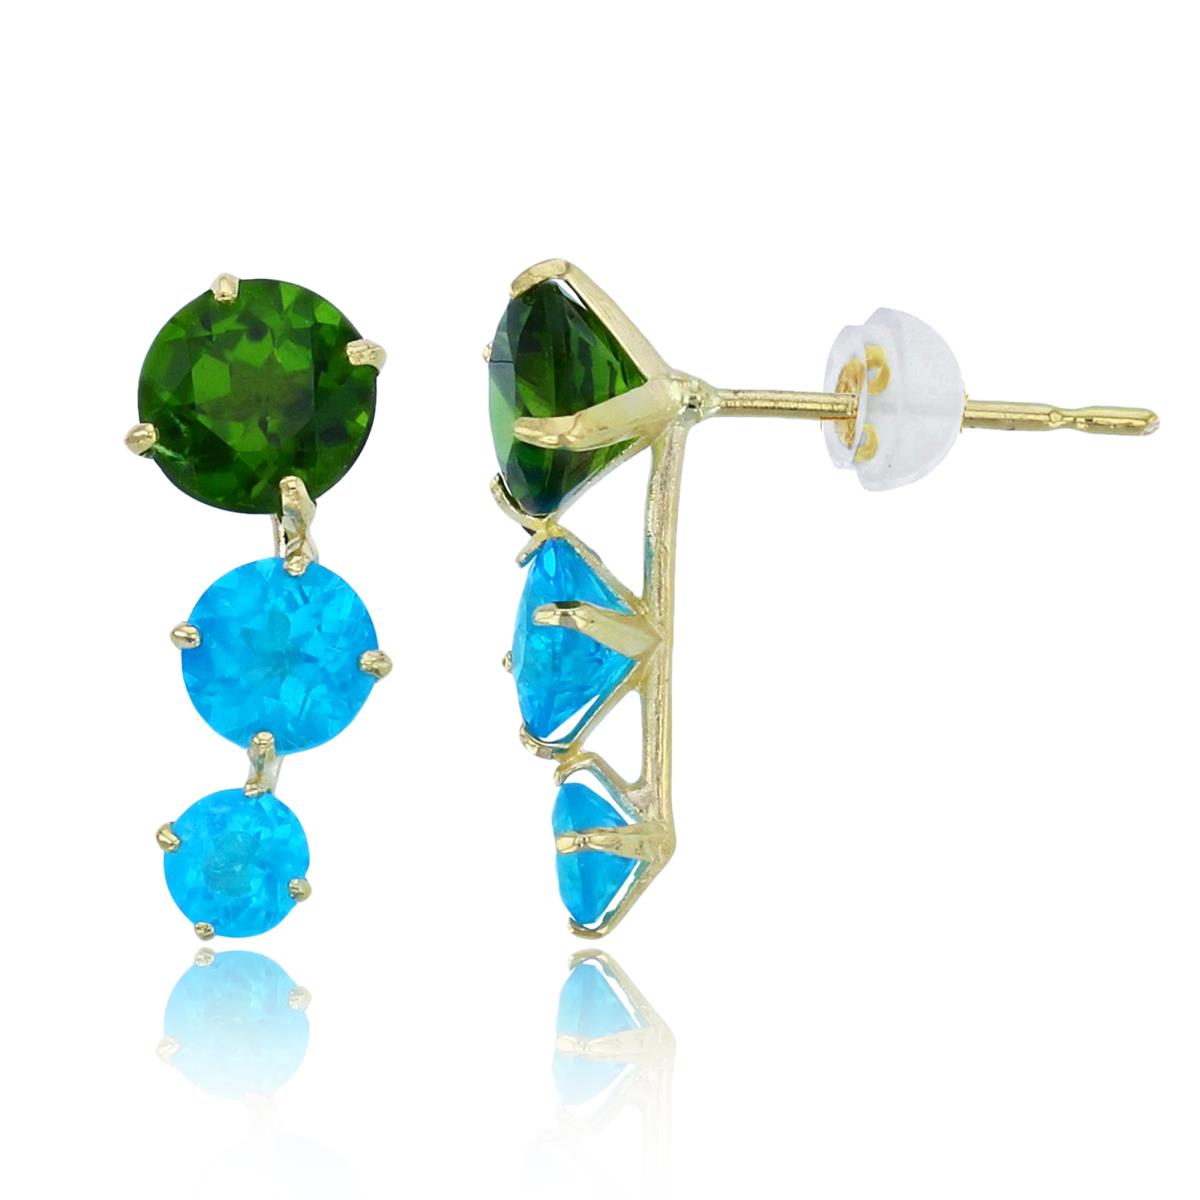 10K Yellow Gold Graduated Rnd Chrom Diopside & Blue Apatite Vertical Earrings with Silicon Backs